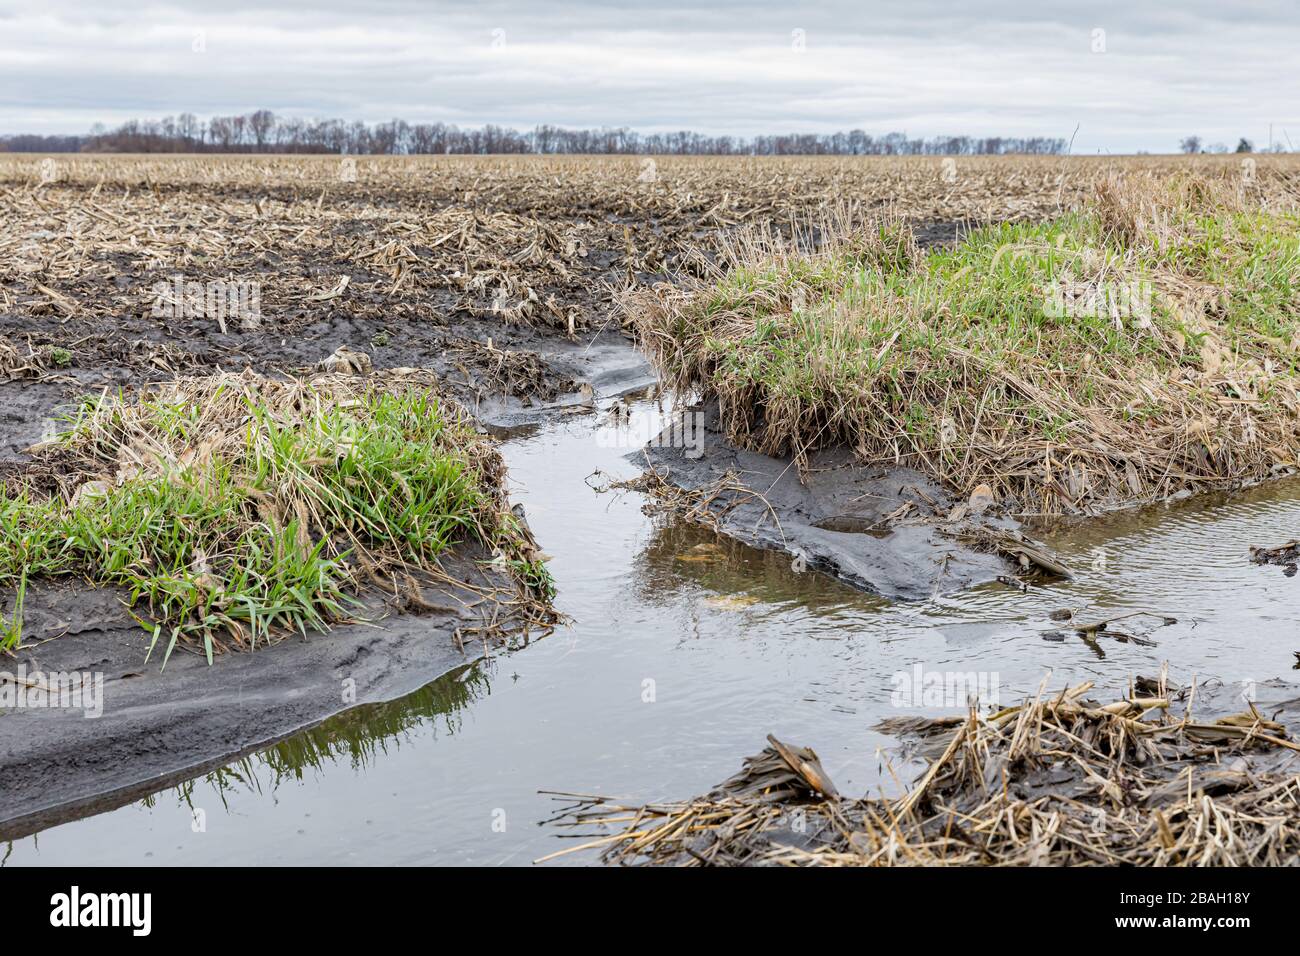 Farm field flooding and soil erosion after heavy rains and spring thunderstorms Stock Photo